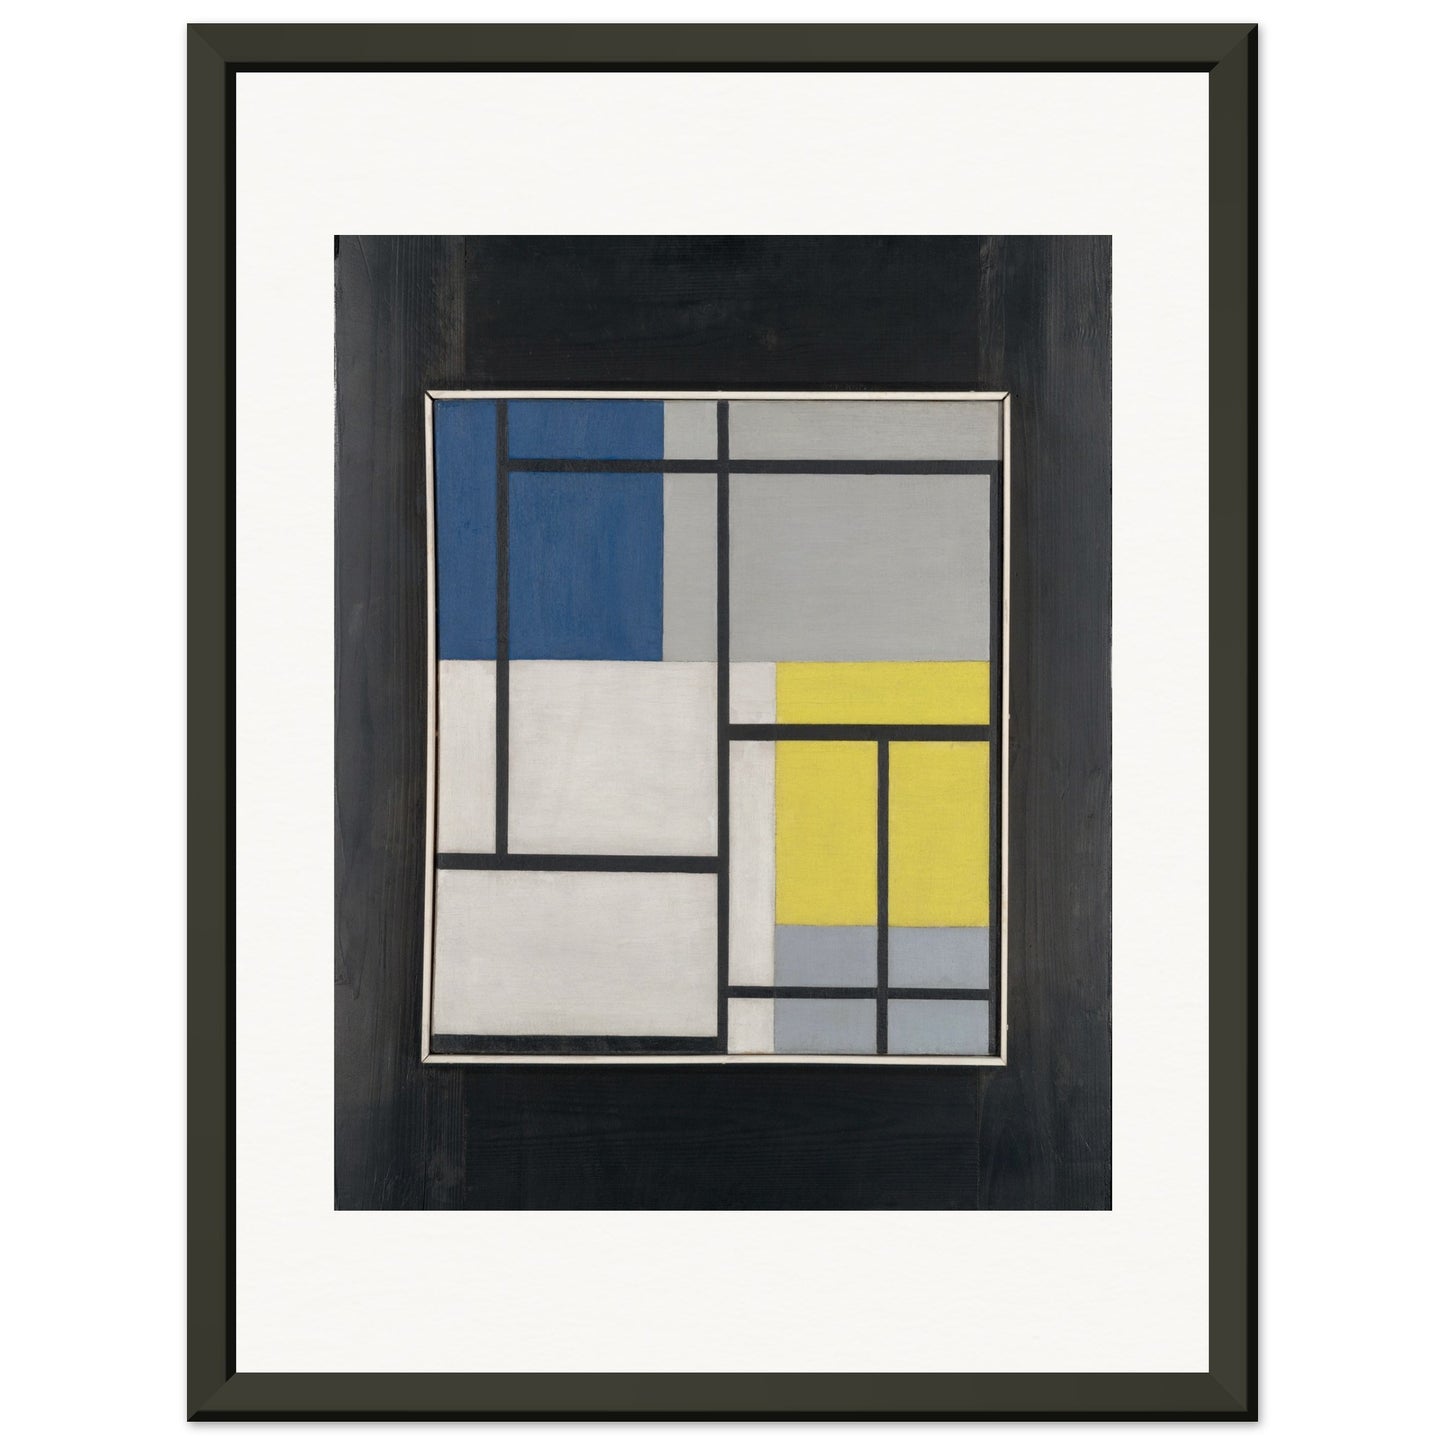 THEO VAN DOESBURG - SIMULTANEOUS COMPOSITION - MUSEUM MATTE POSTER IN METAL FRAME